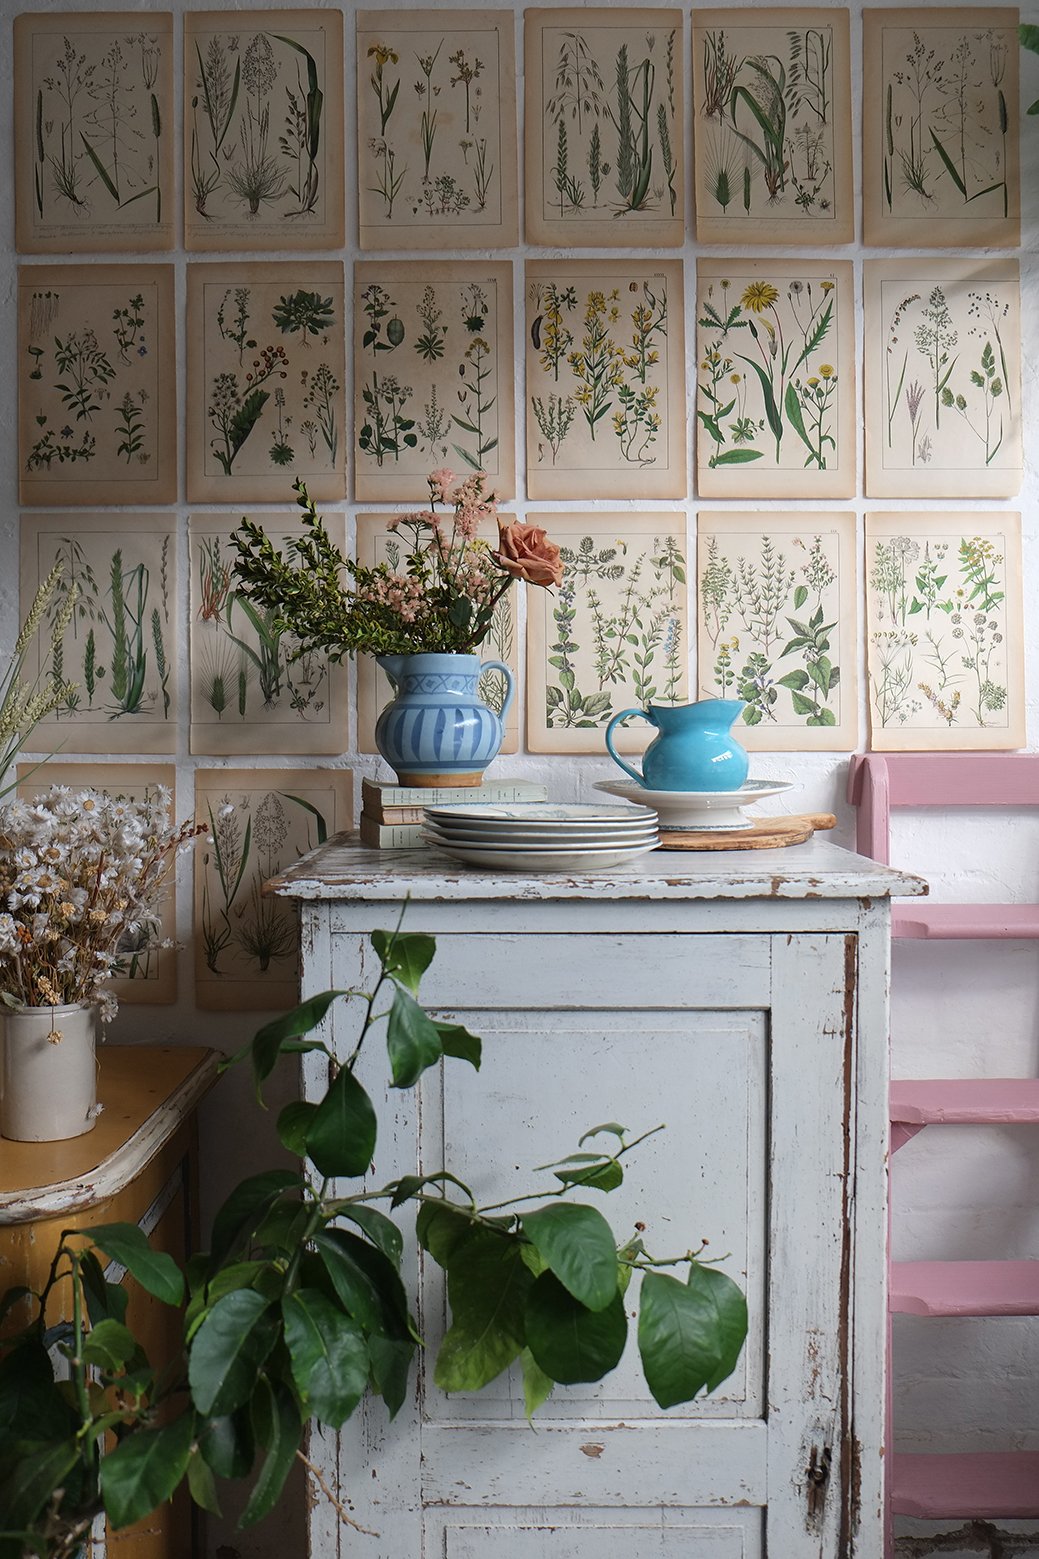 Vintage objects on display with botanical drawings on wall